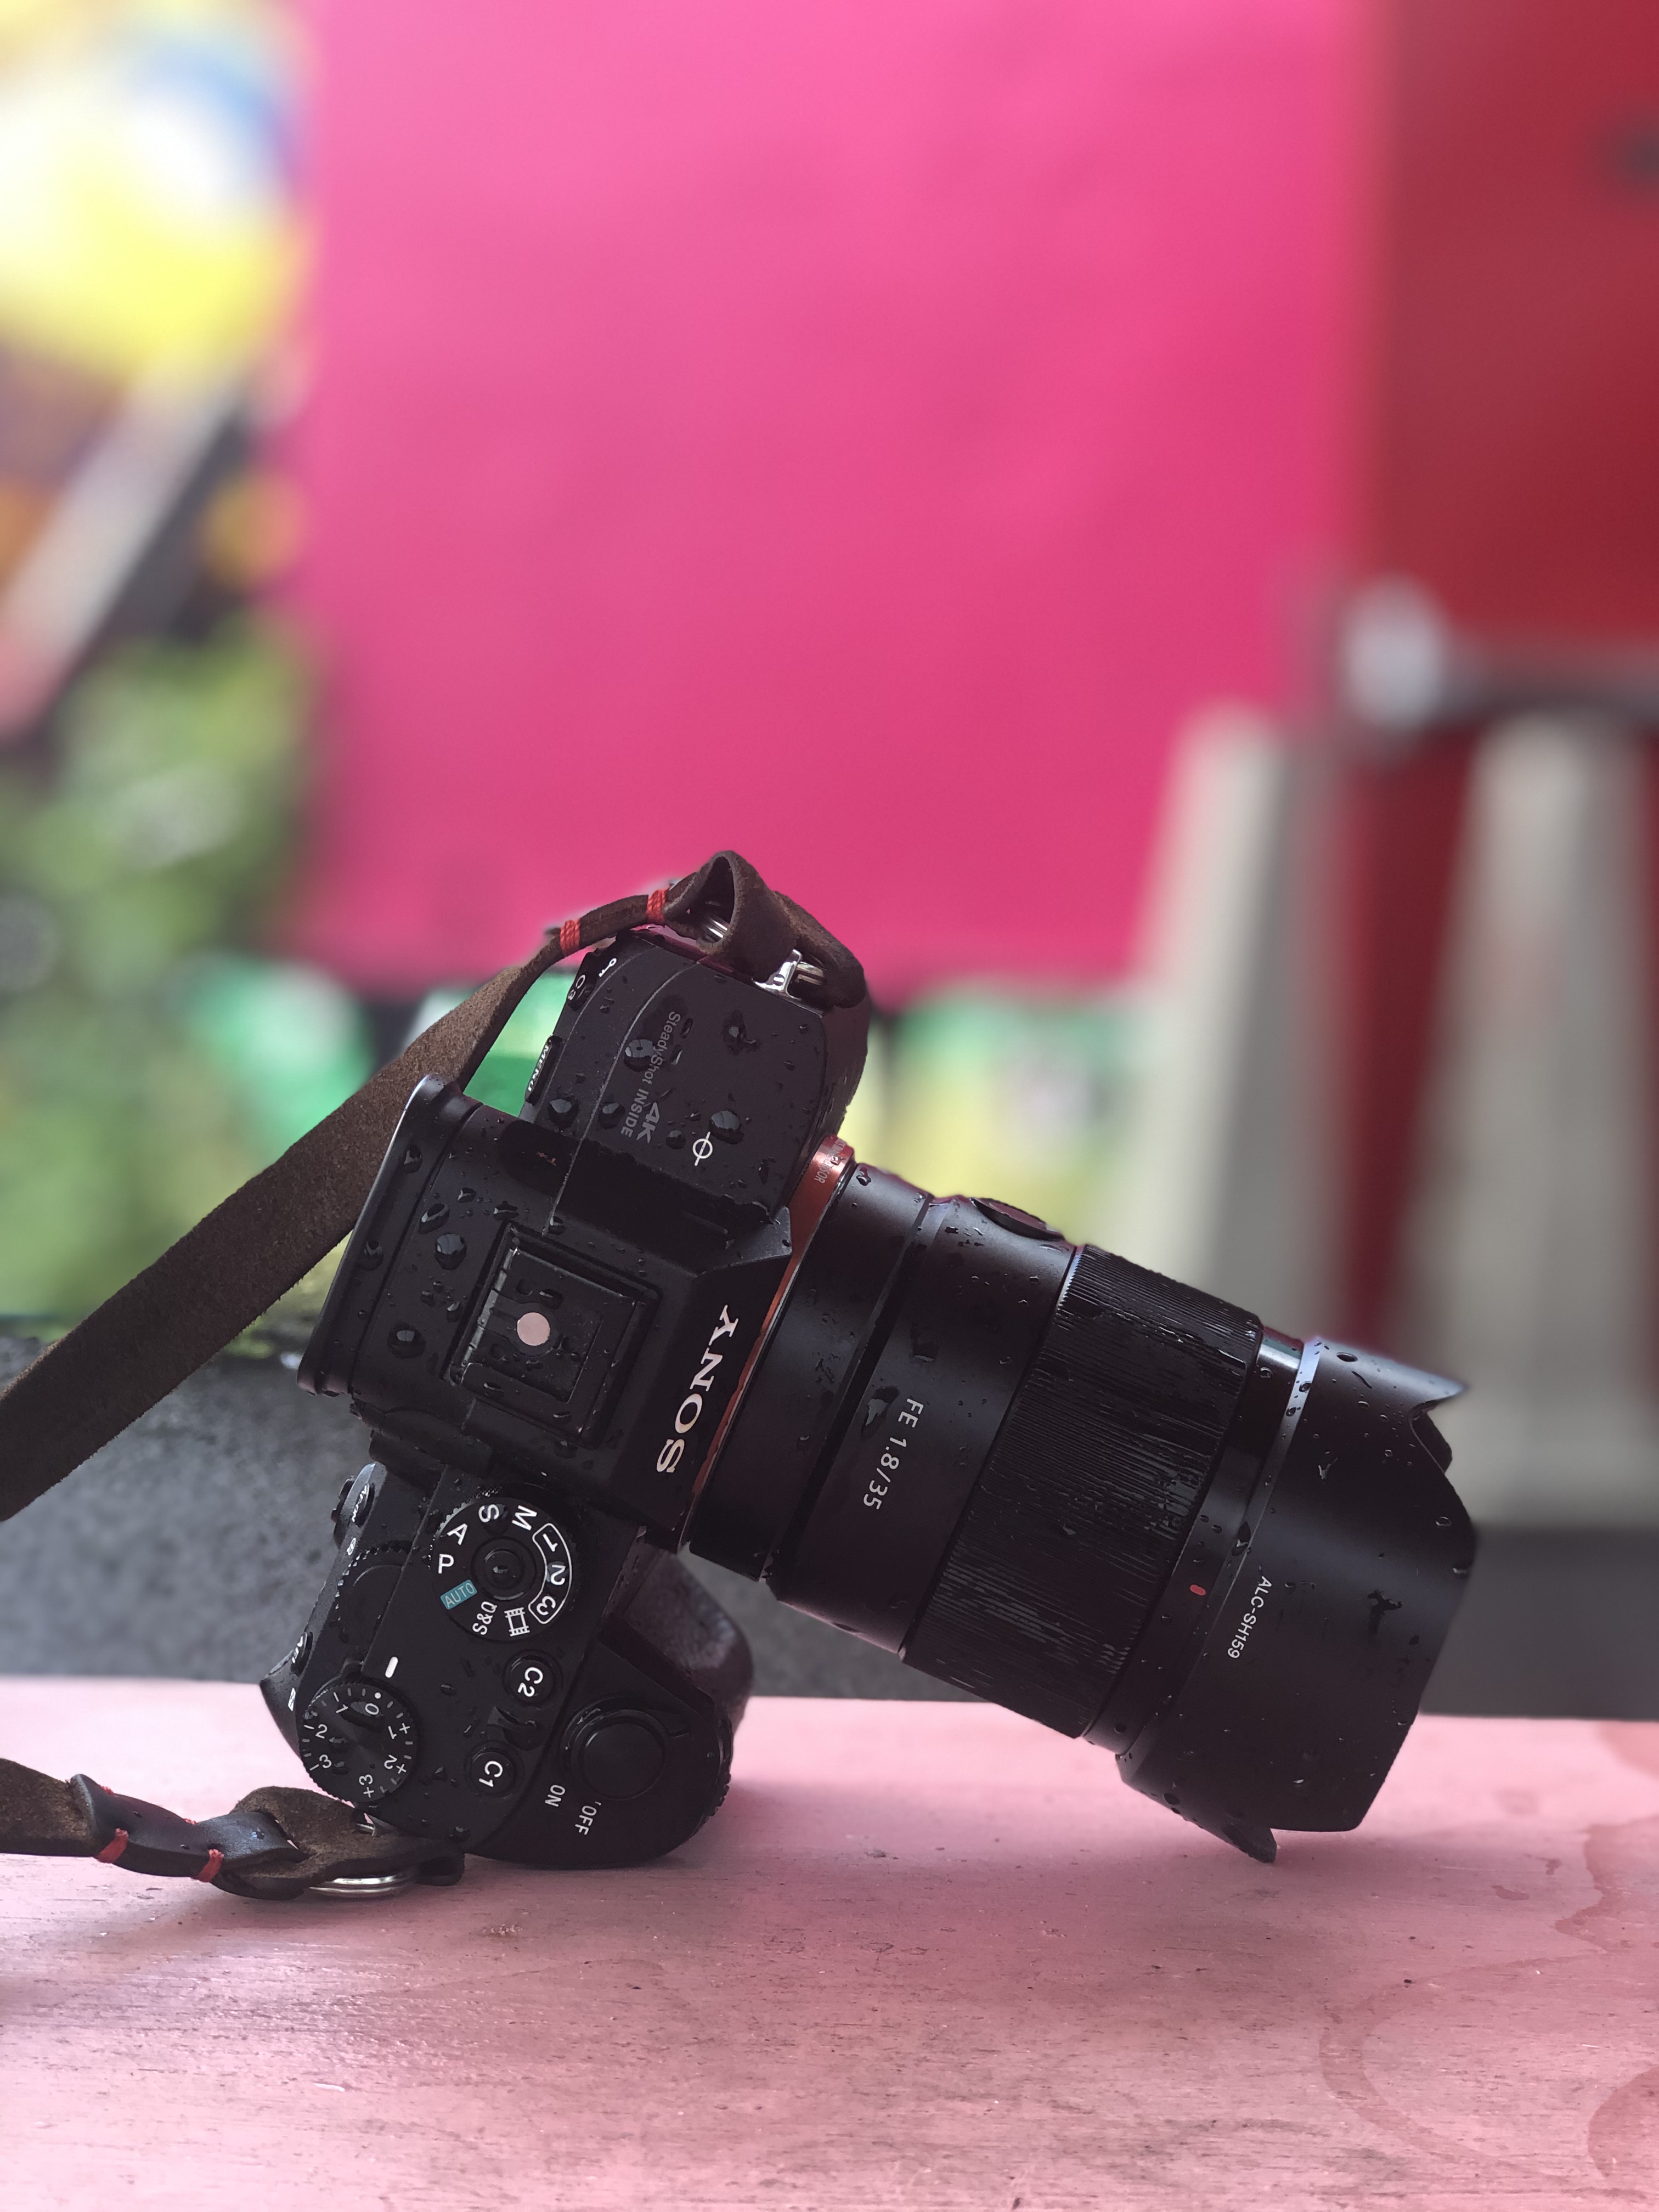 Sony FE 35mm f1.8 review